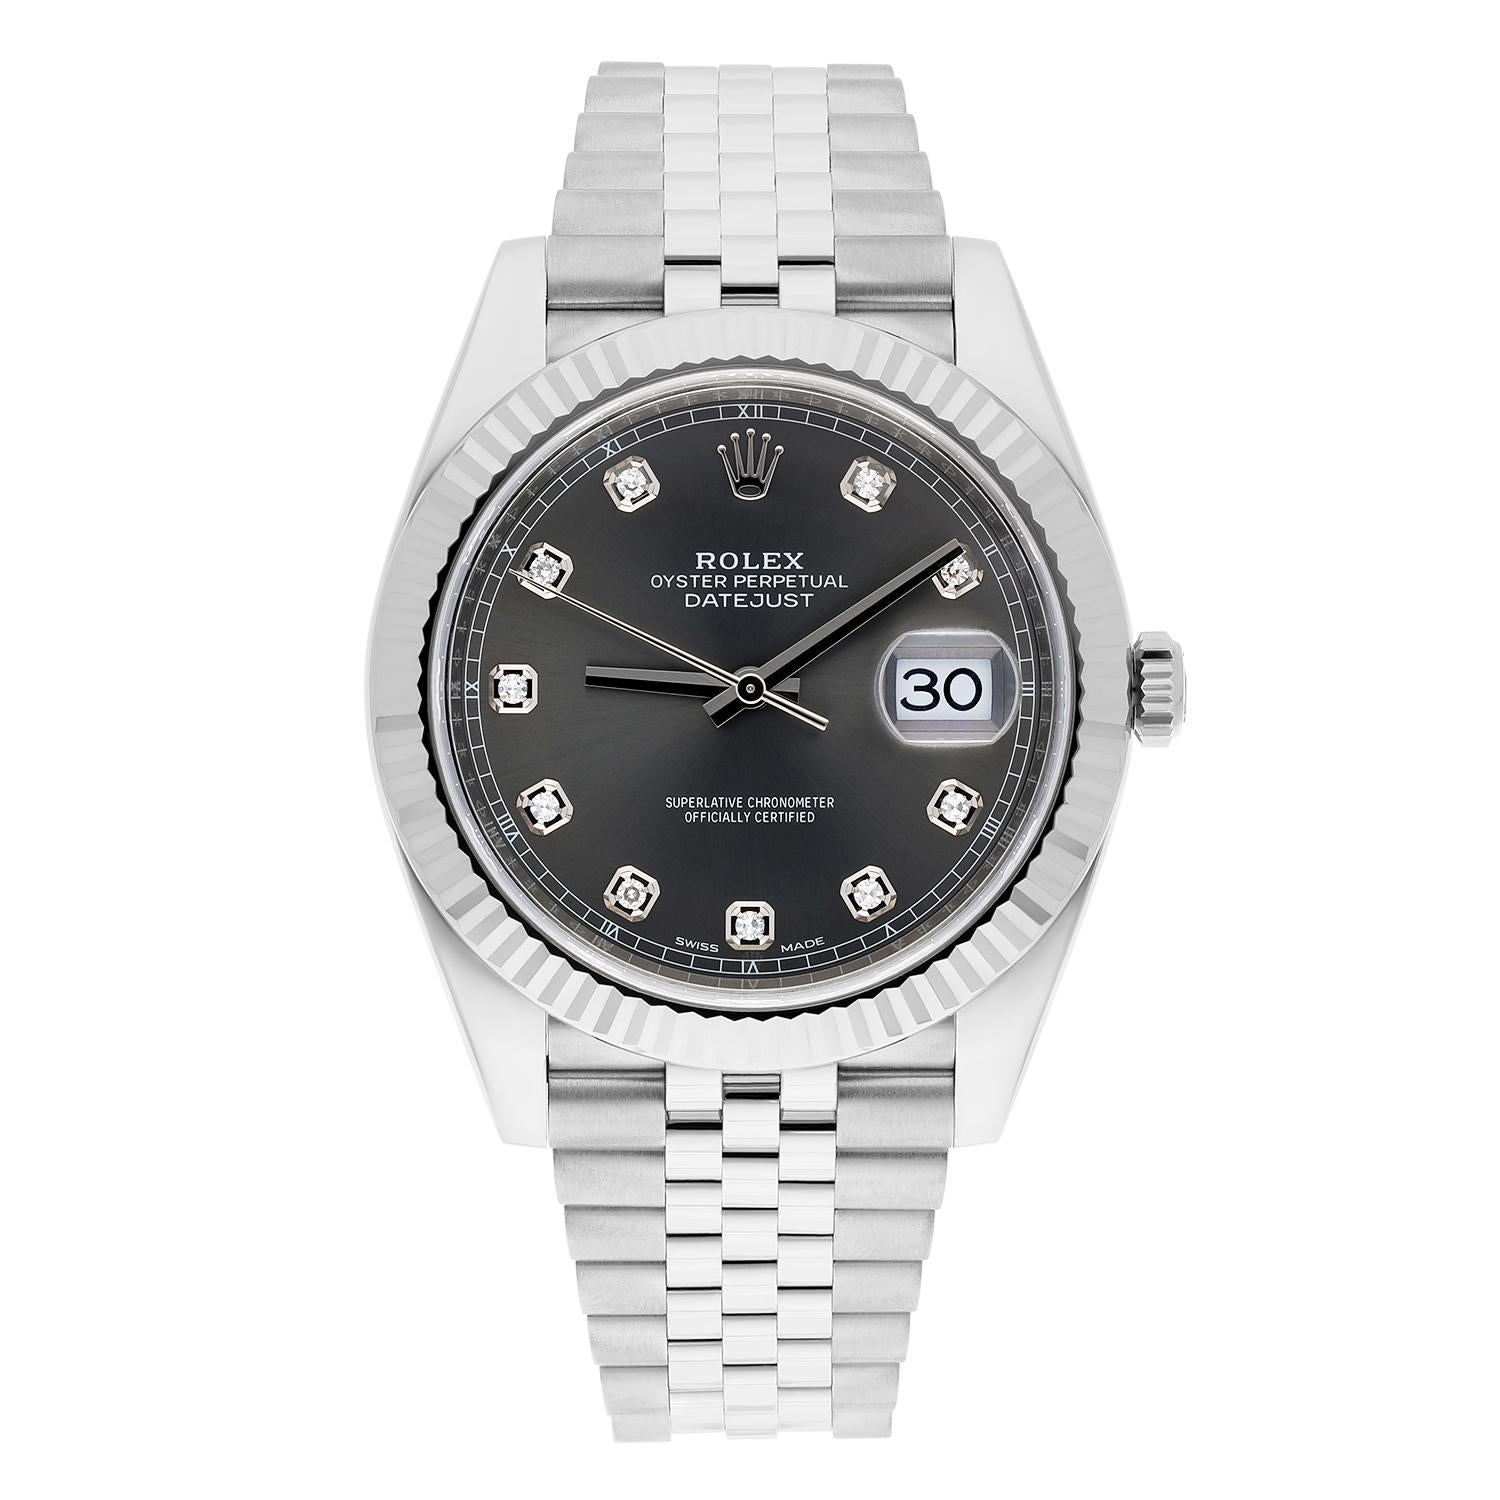 Rolex Datejust 41mm Jubilee Stainless Steel Watch Rhodium Diamond Dial 126334 In Excellent Condition For Sale In New York, NY